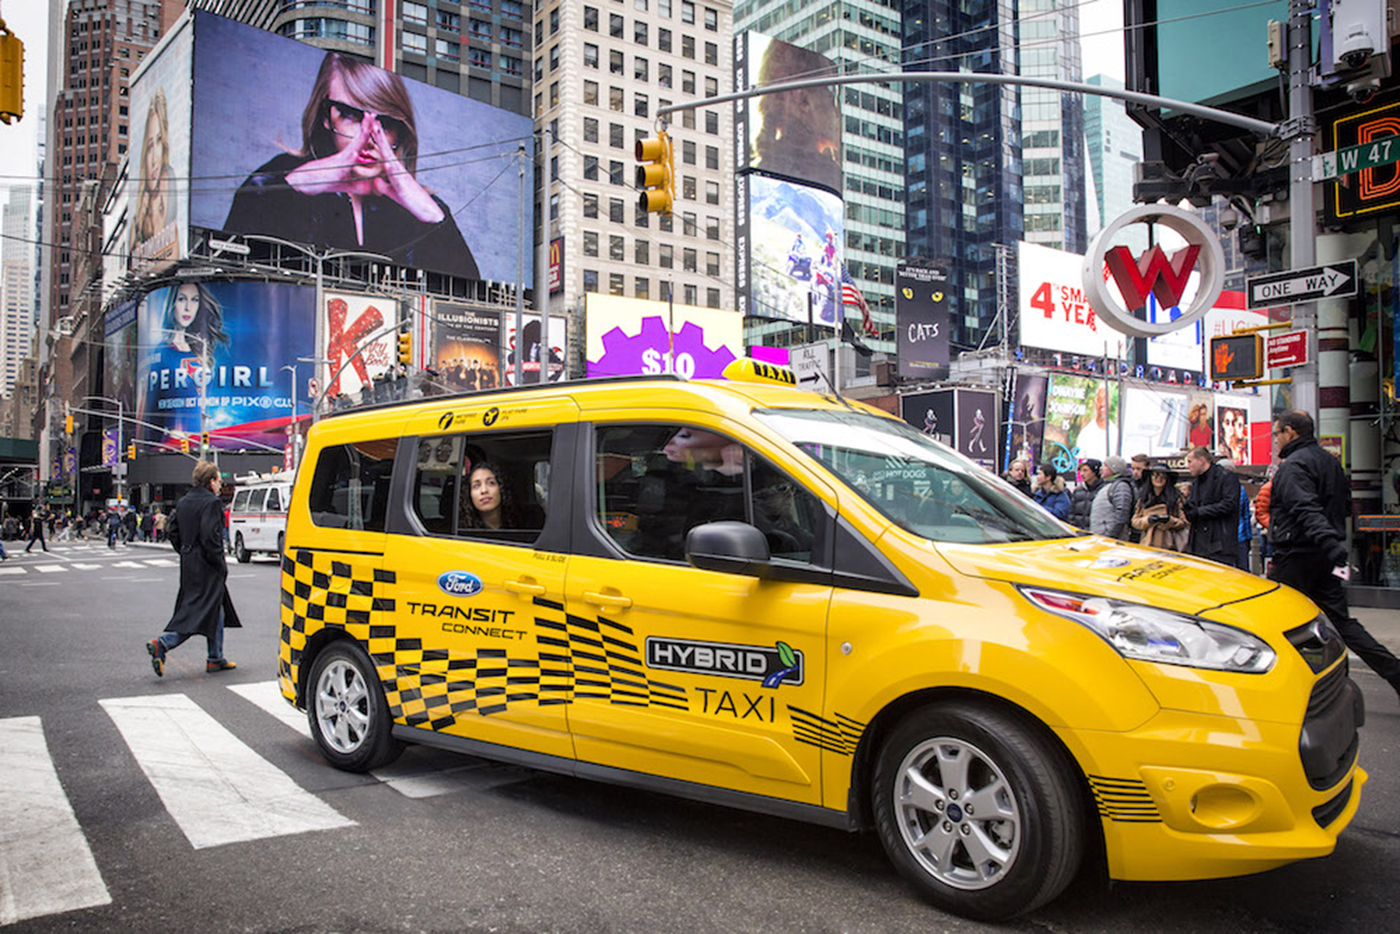 2017cesf150-mustang-transit-hybrid-taxi-9-small.jpg